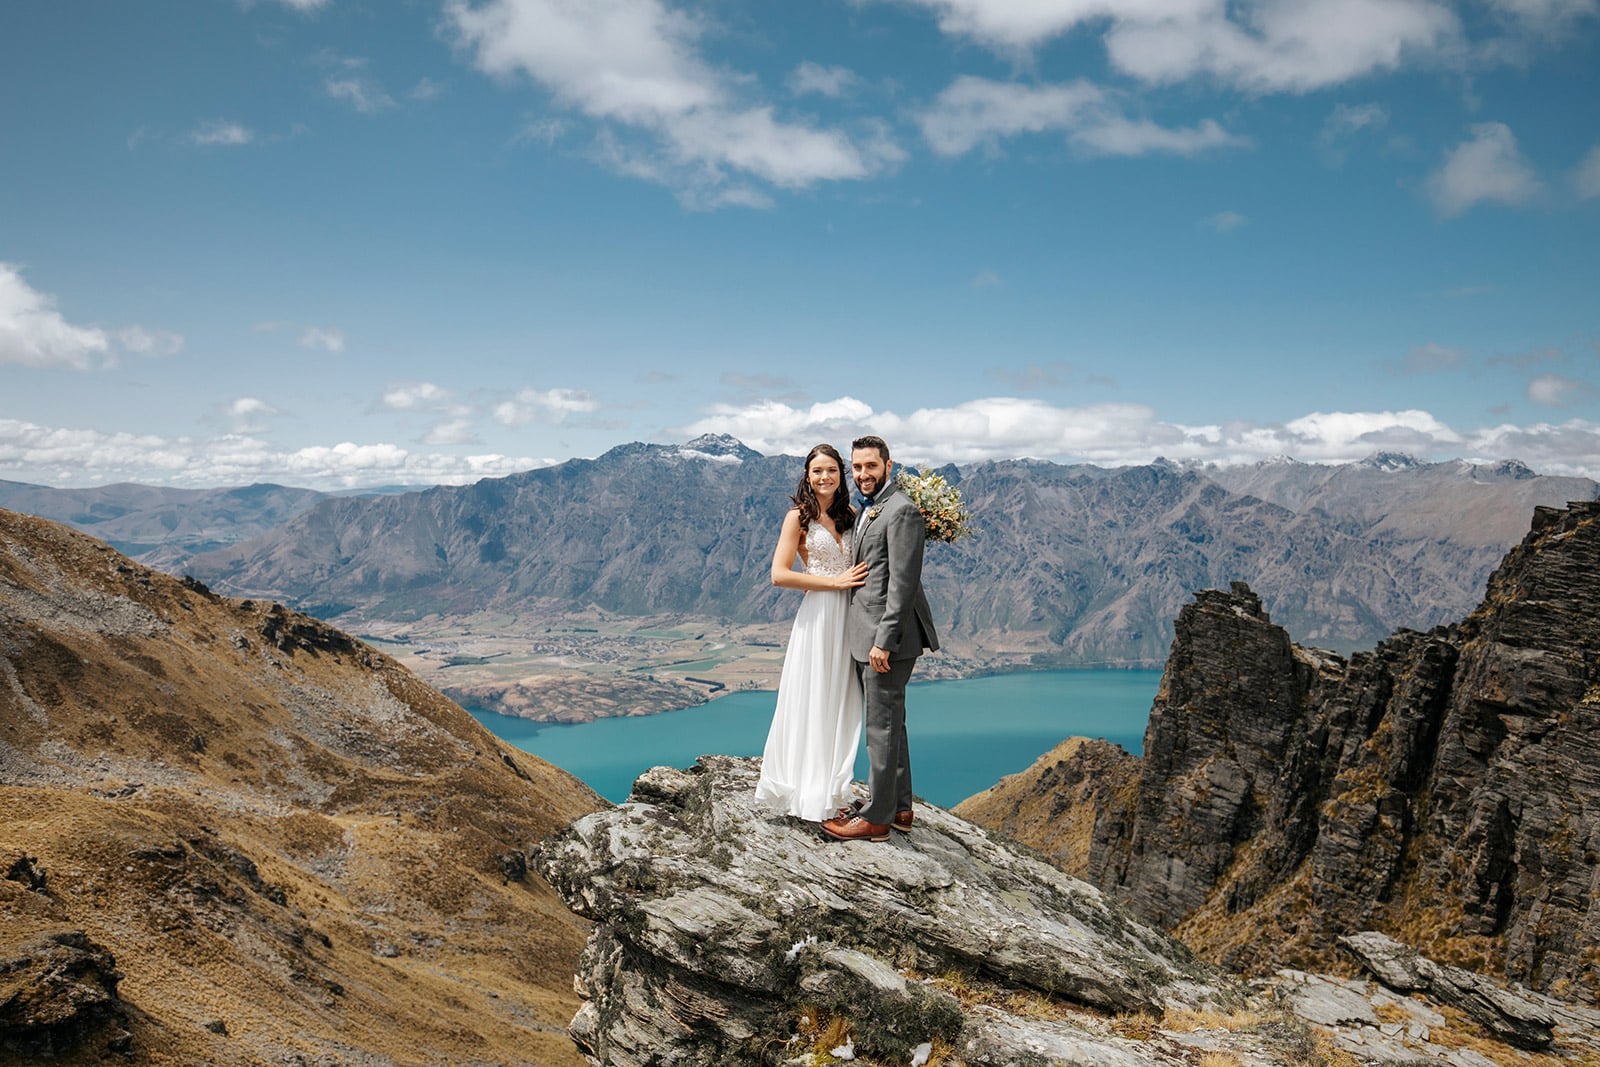 Family Heli Wedding with Helicopter in Queenstown with black wedding dress